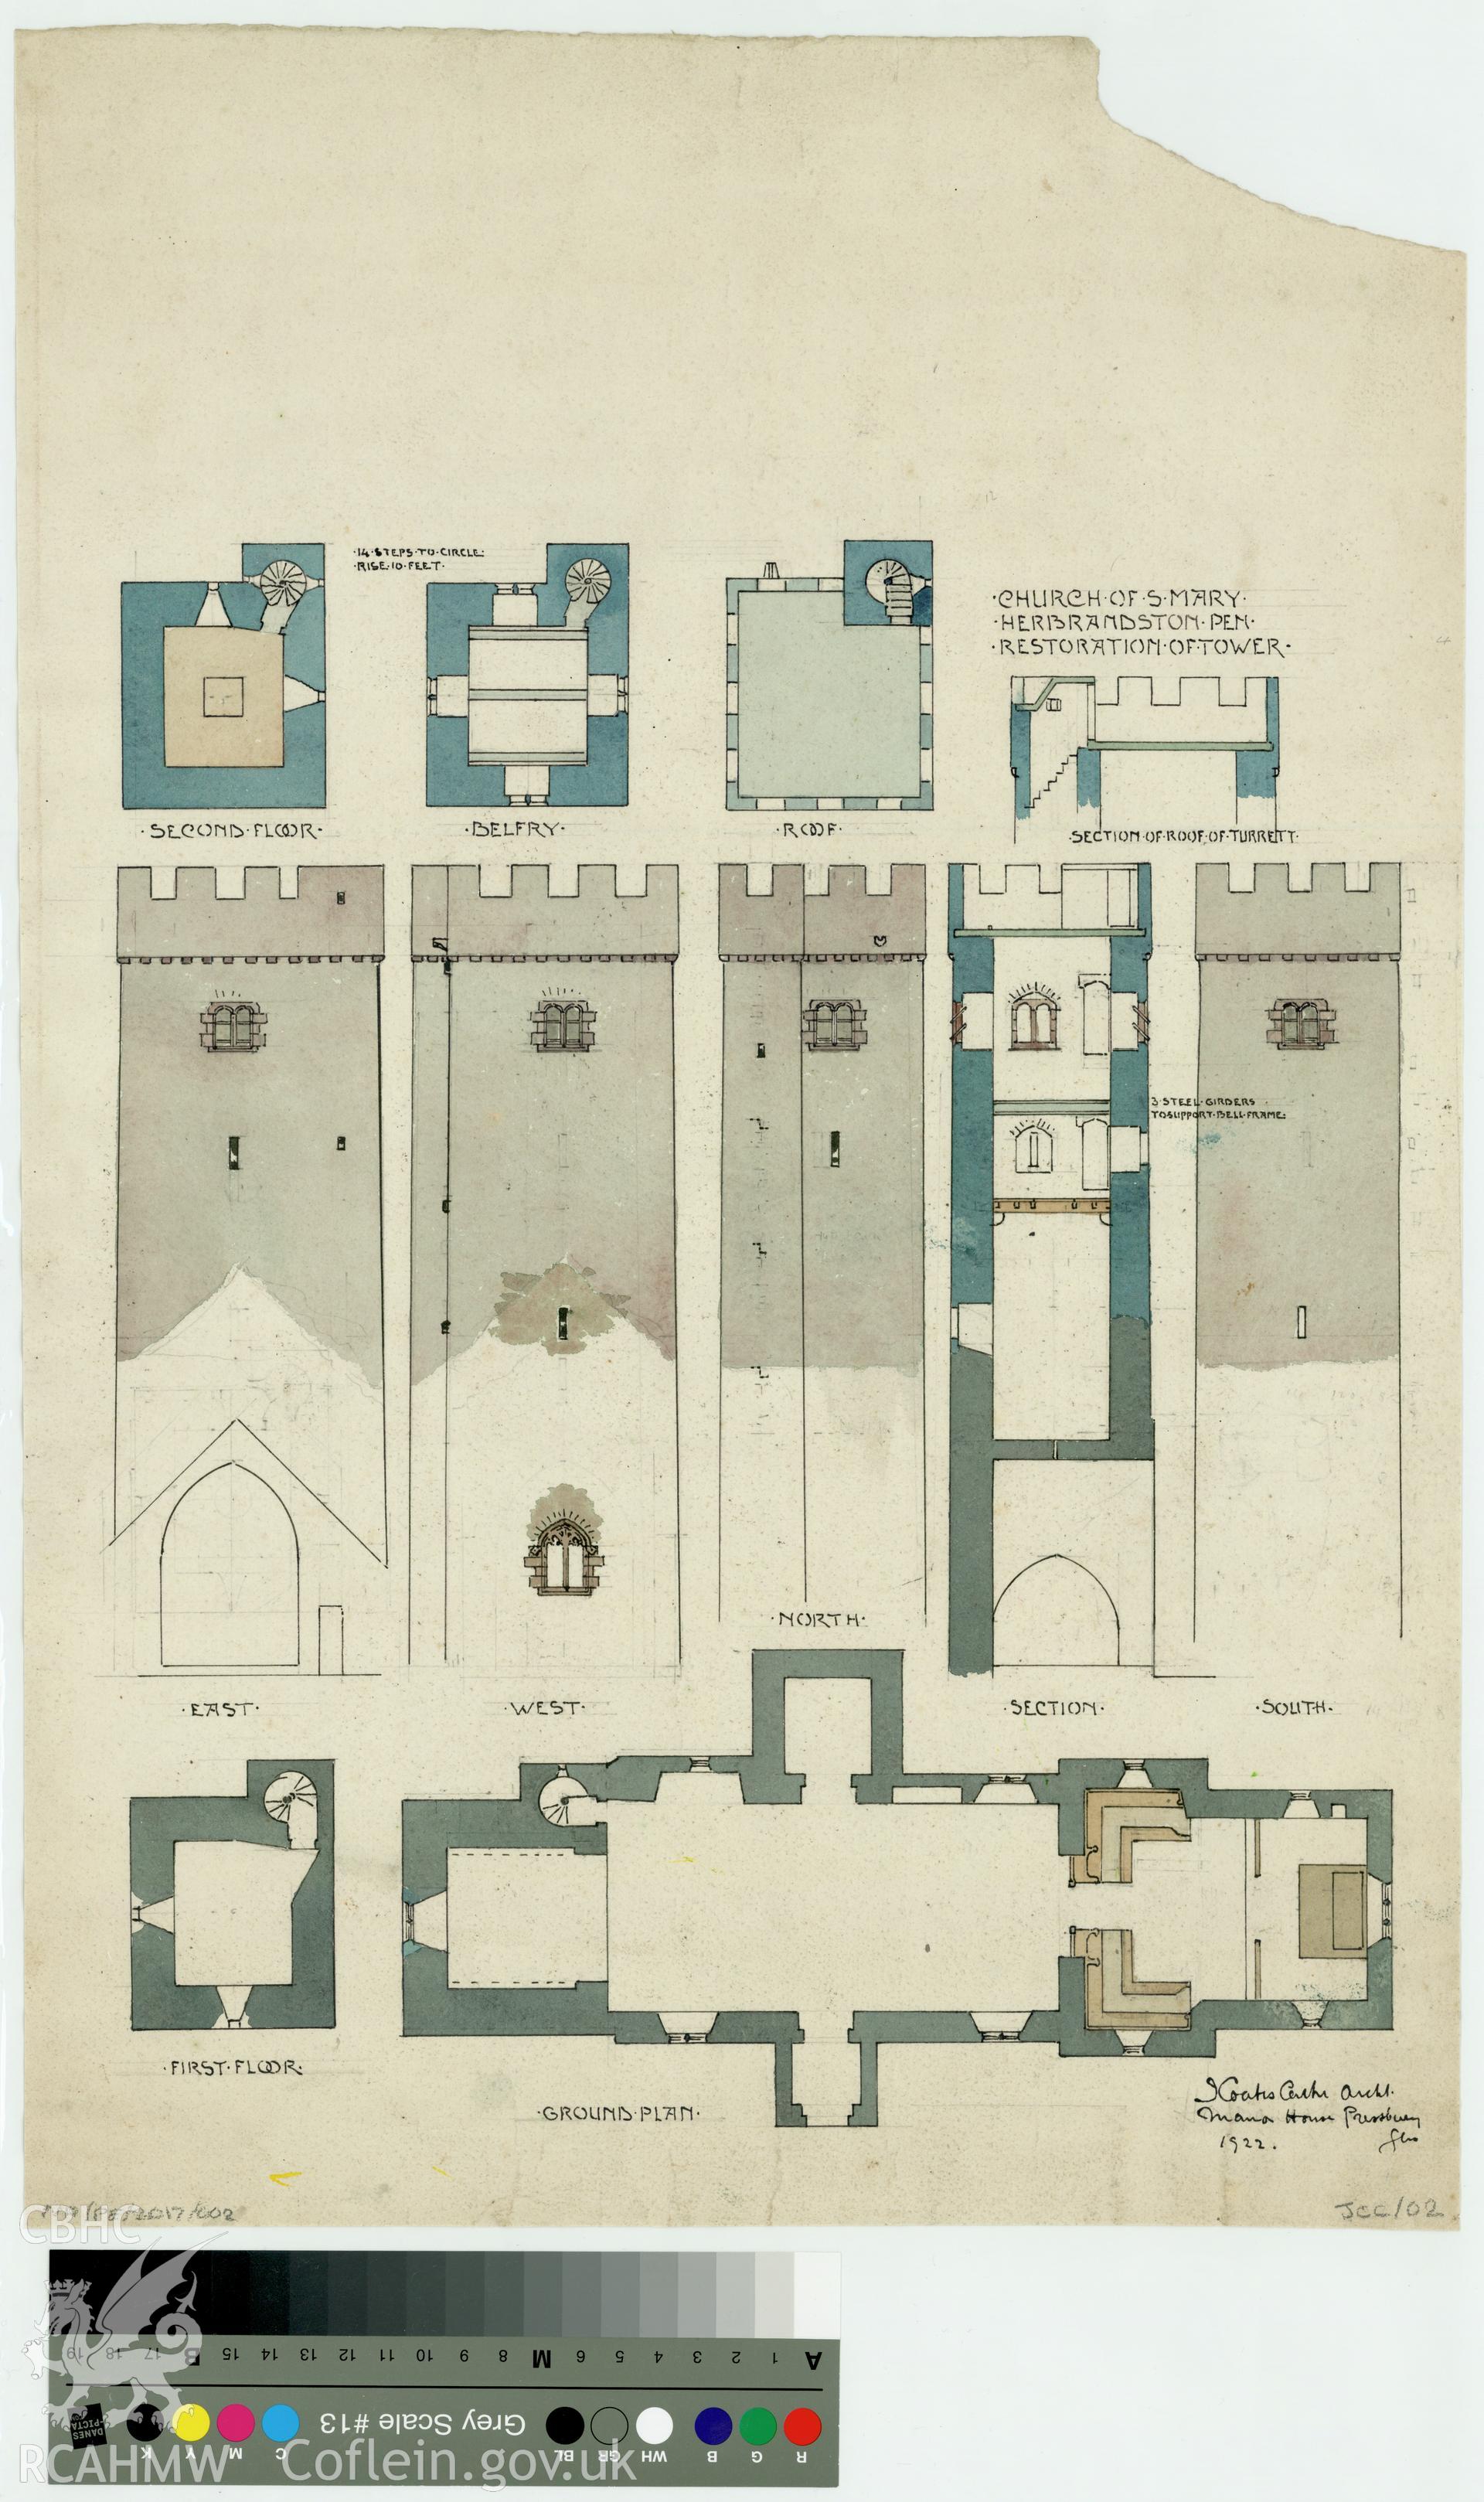 Original coloured drawings of the tower at Herbrandston Church, produced by John Coates-Carter in 1922.